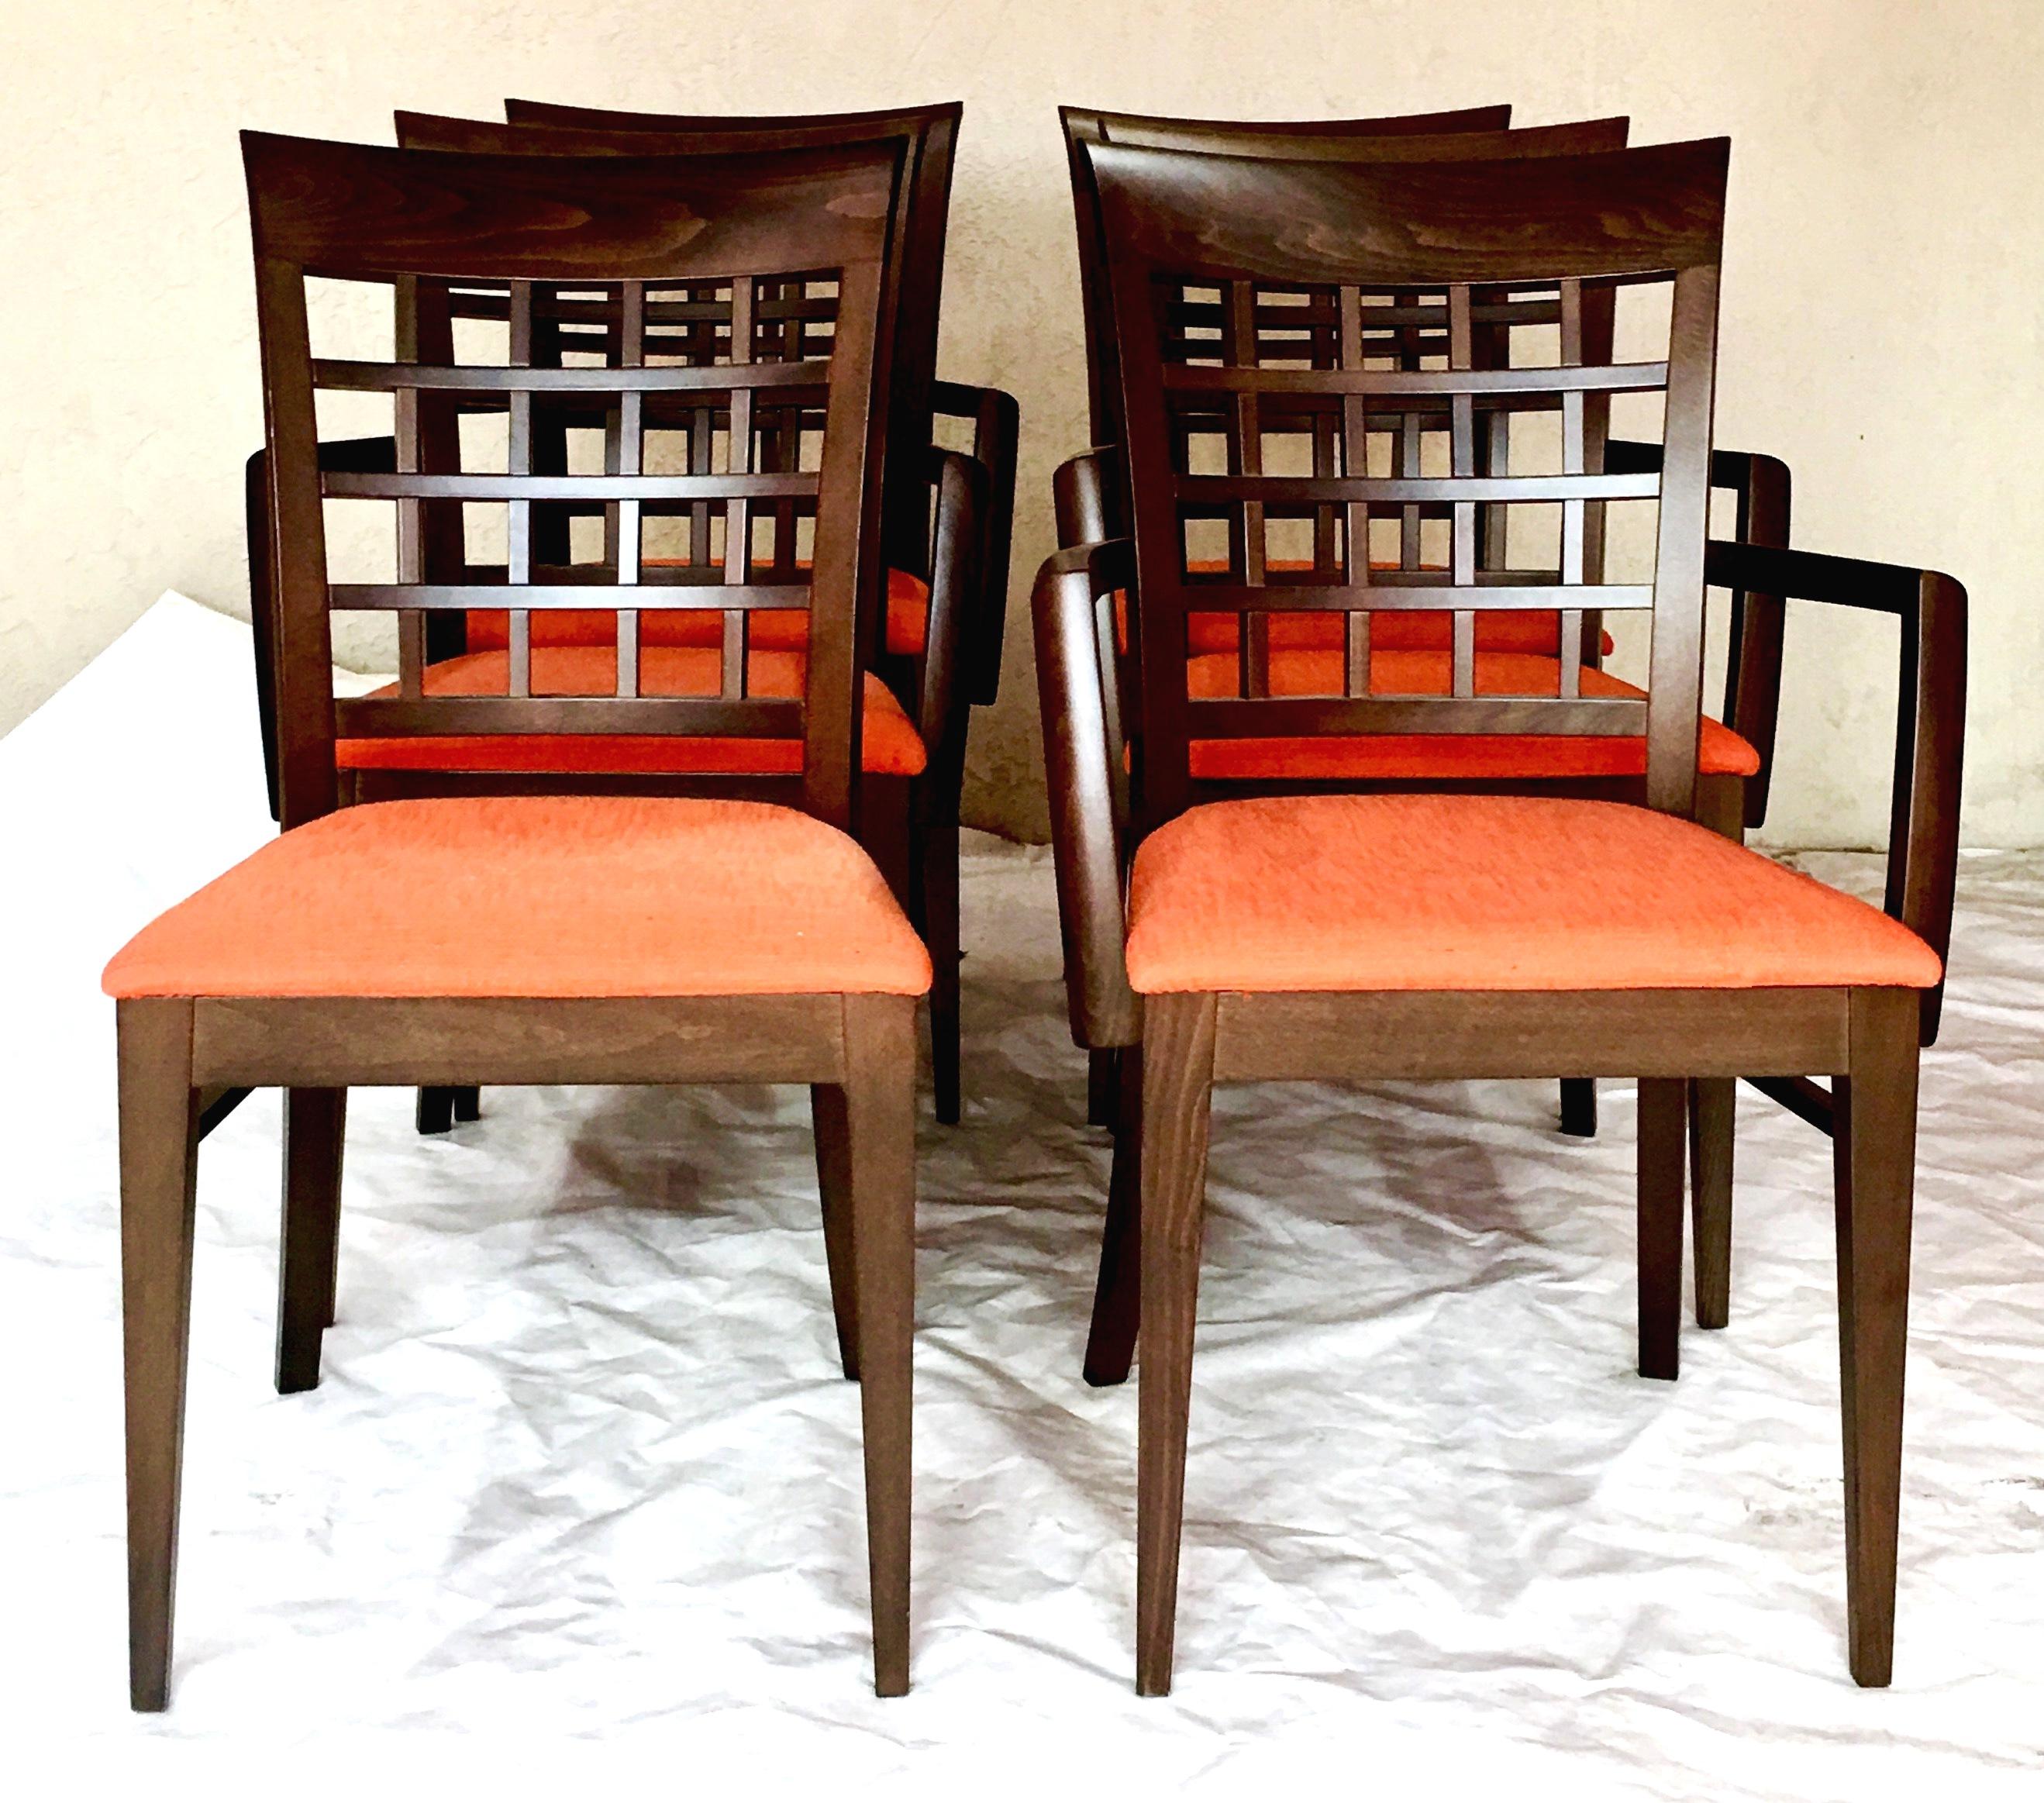 21st Century Contemporary & Modern upholstered dining chairs By,  Roche Bobois. Features a dark mahogany stain wood frame with an orange linen blend upholstery fabric.
These like new, never used,  contemporary set of six chairs includes two slipper